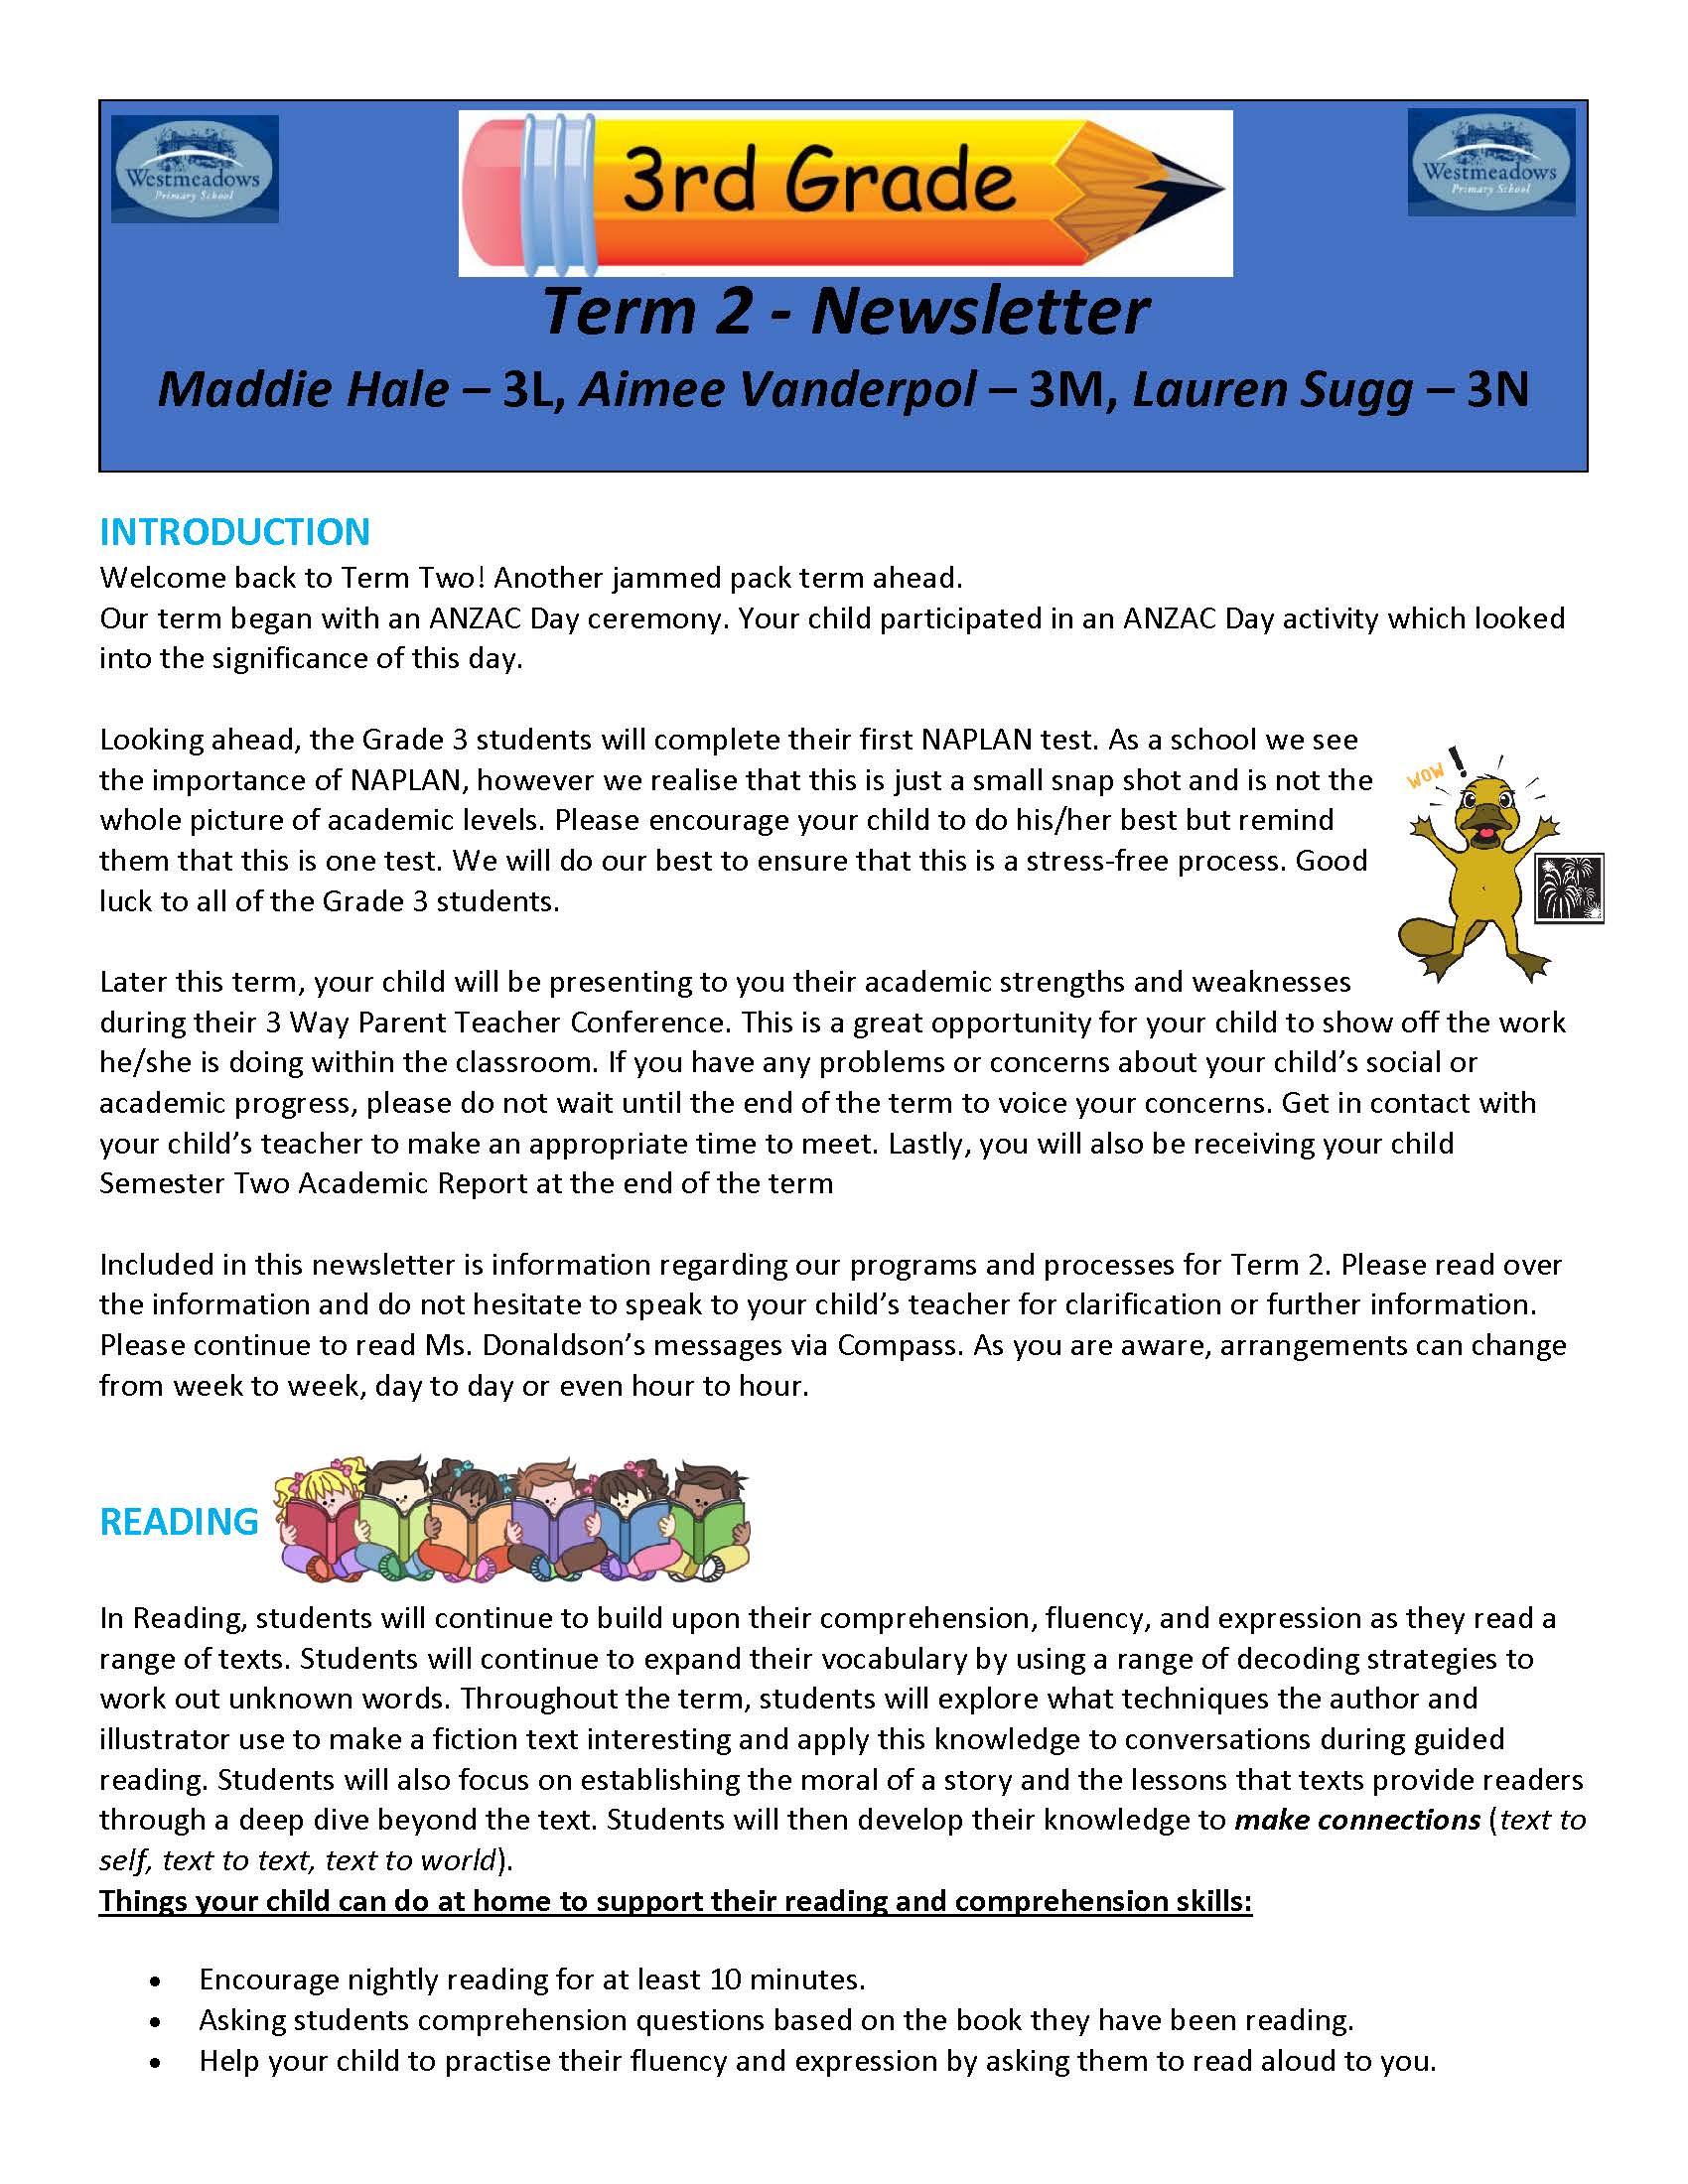 Grade 3 Term 2, 2022 Newsletter_Page_1